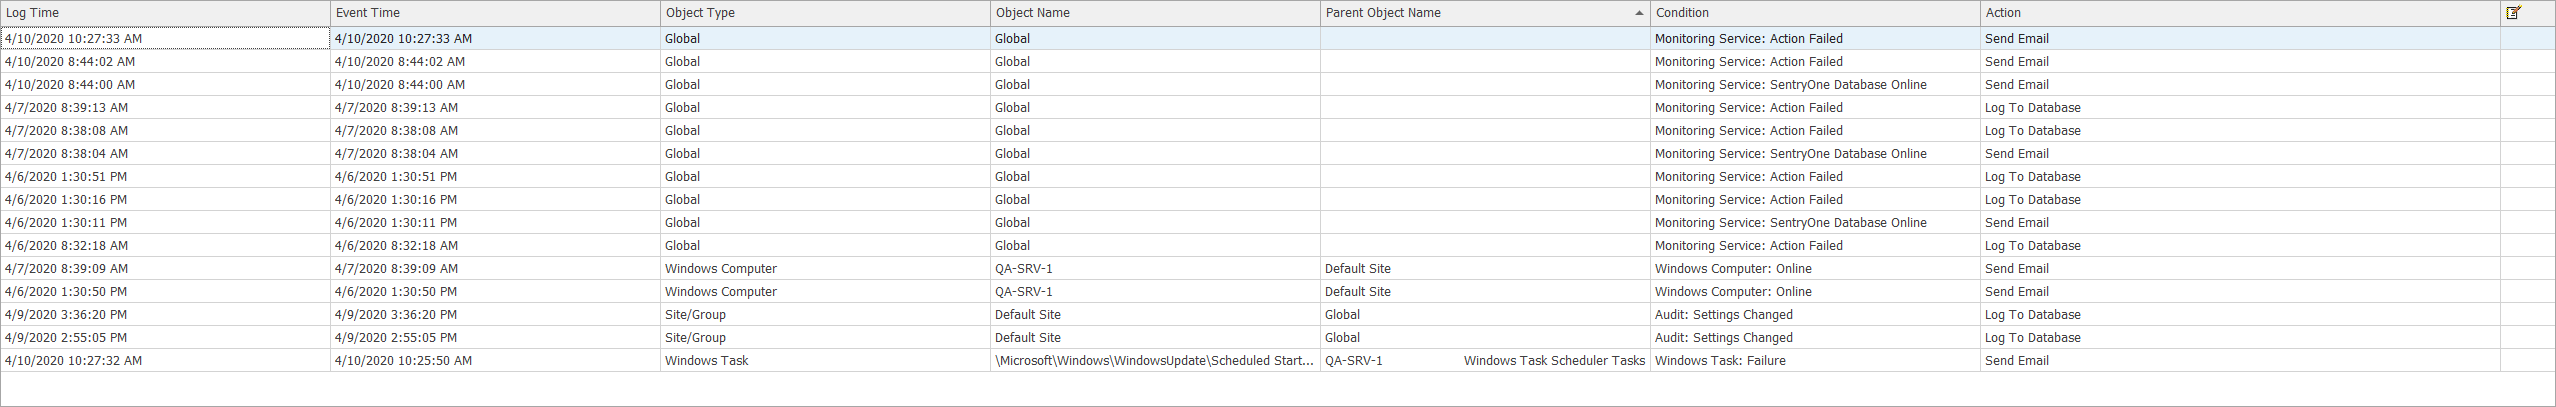 SQL Sentry Actions Log List View